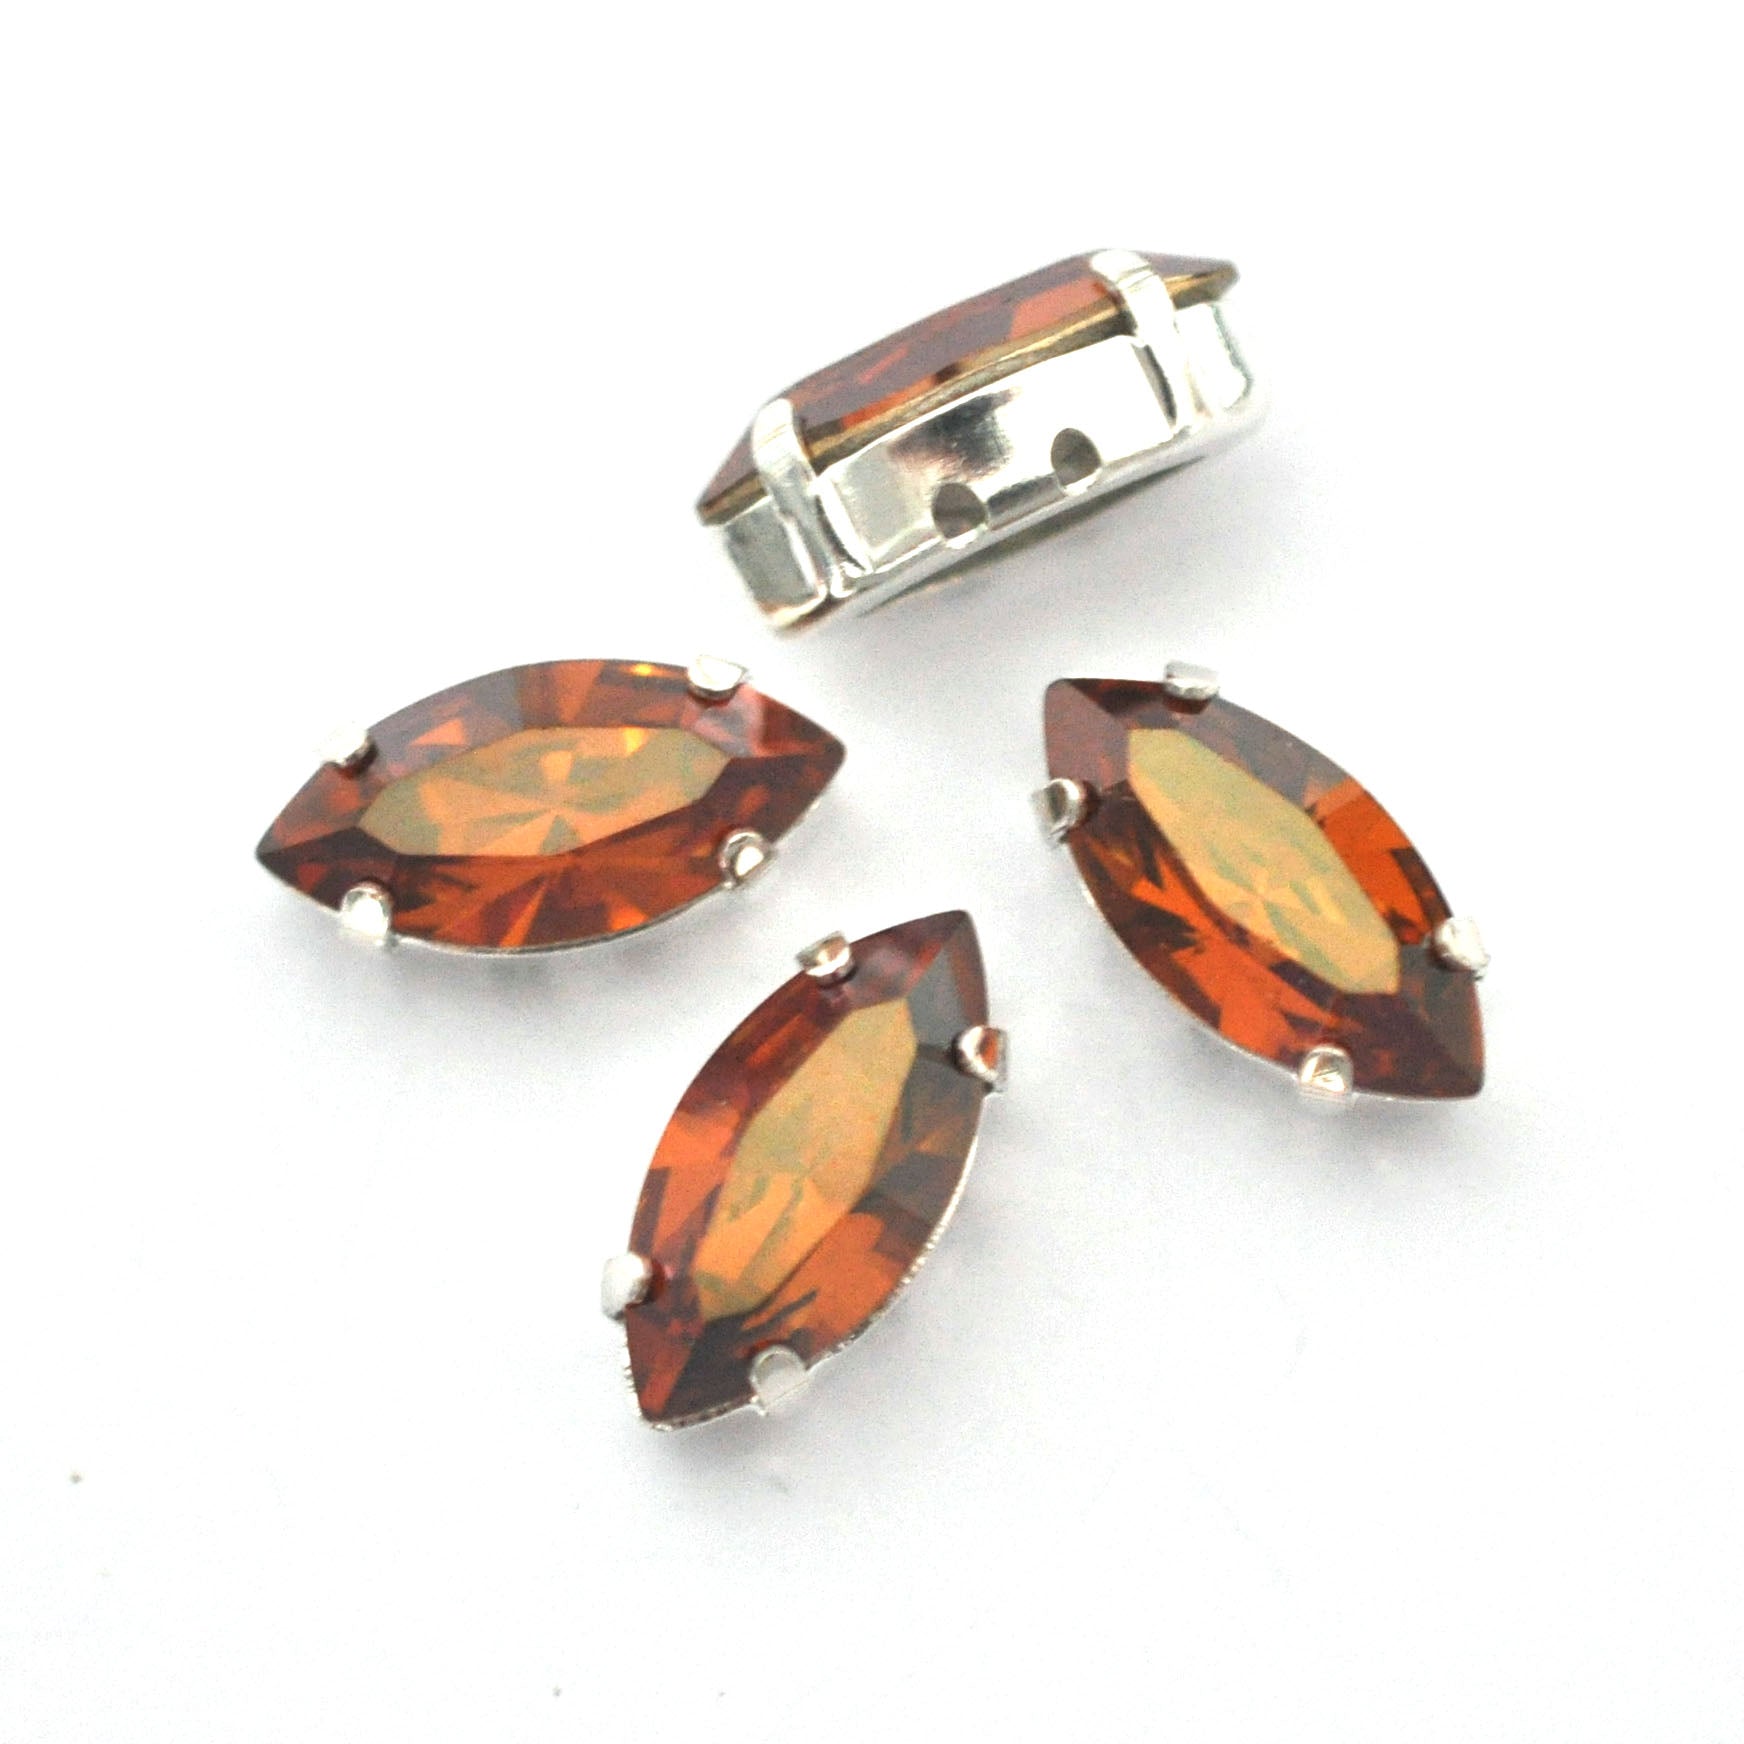 Copper 15x7mm Navette Sew On Crystals - 4 Pieces